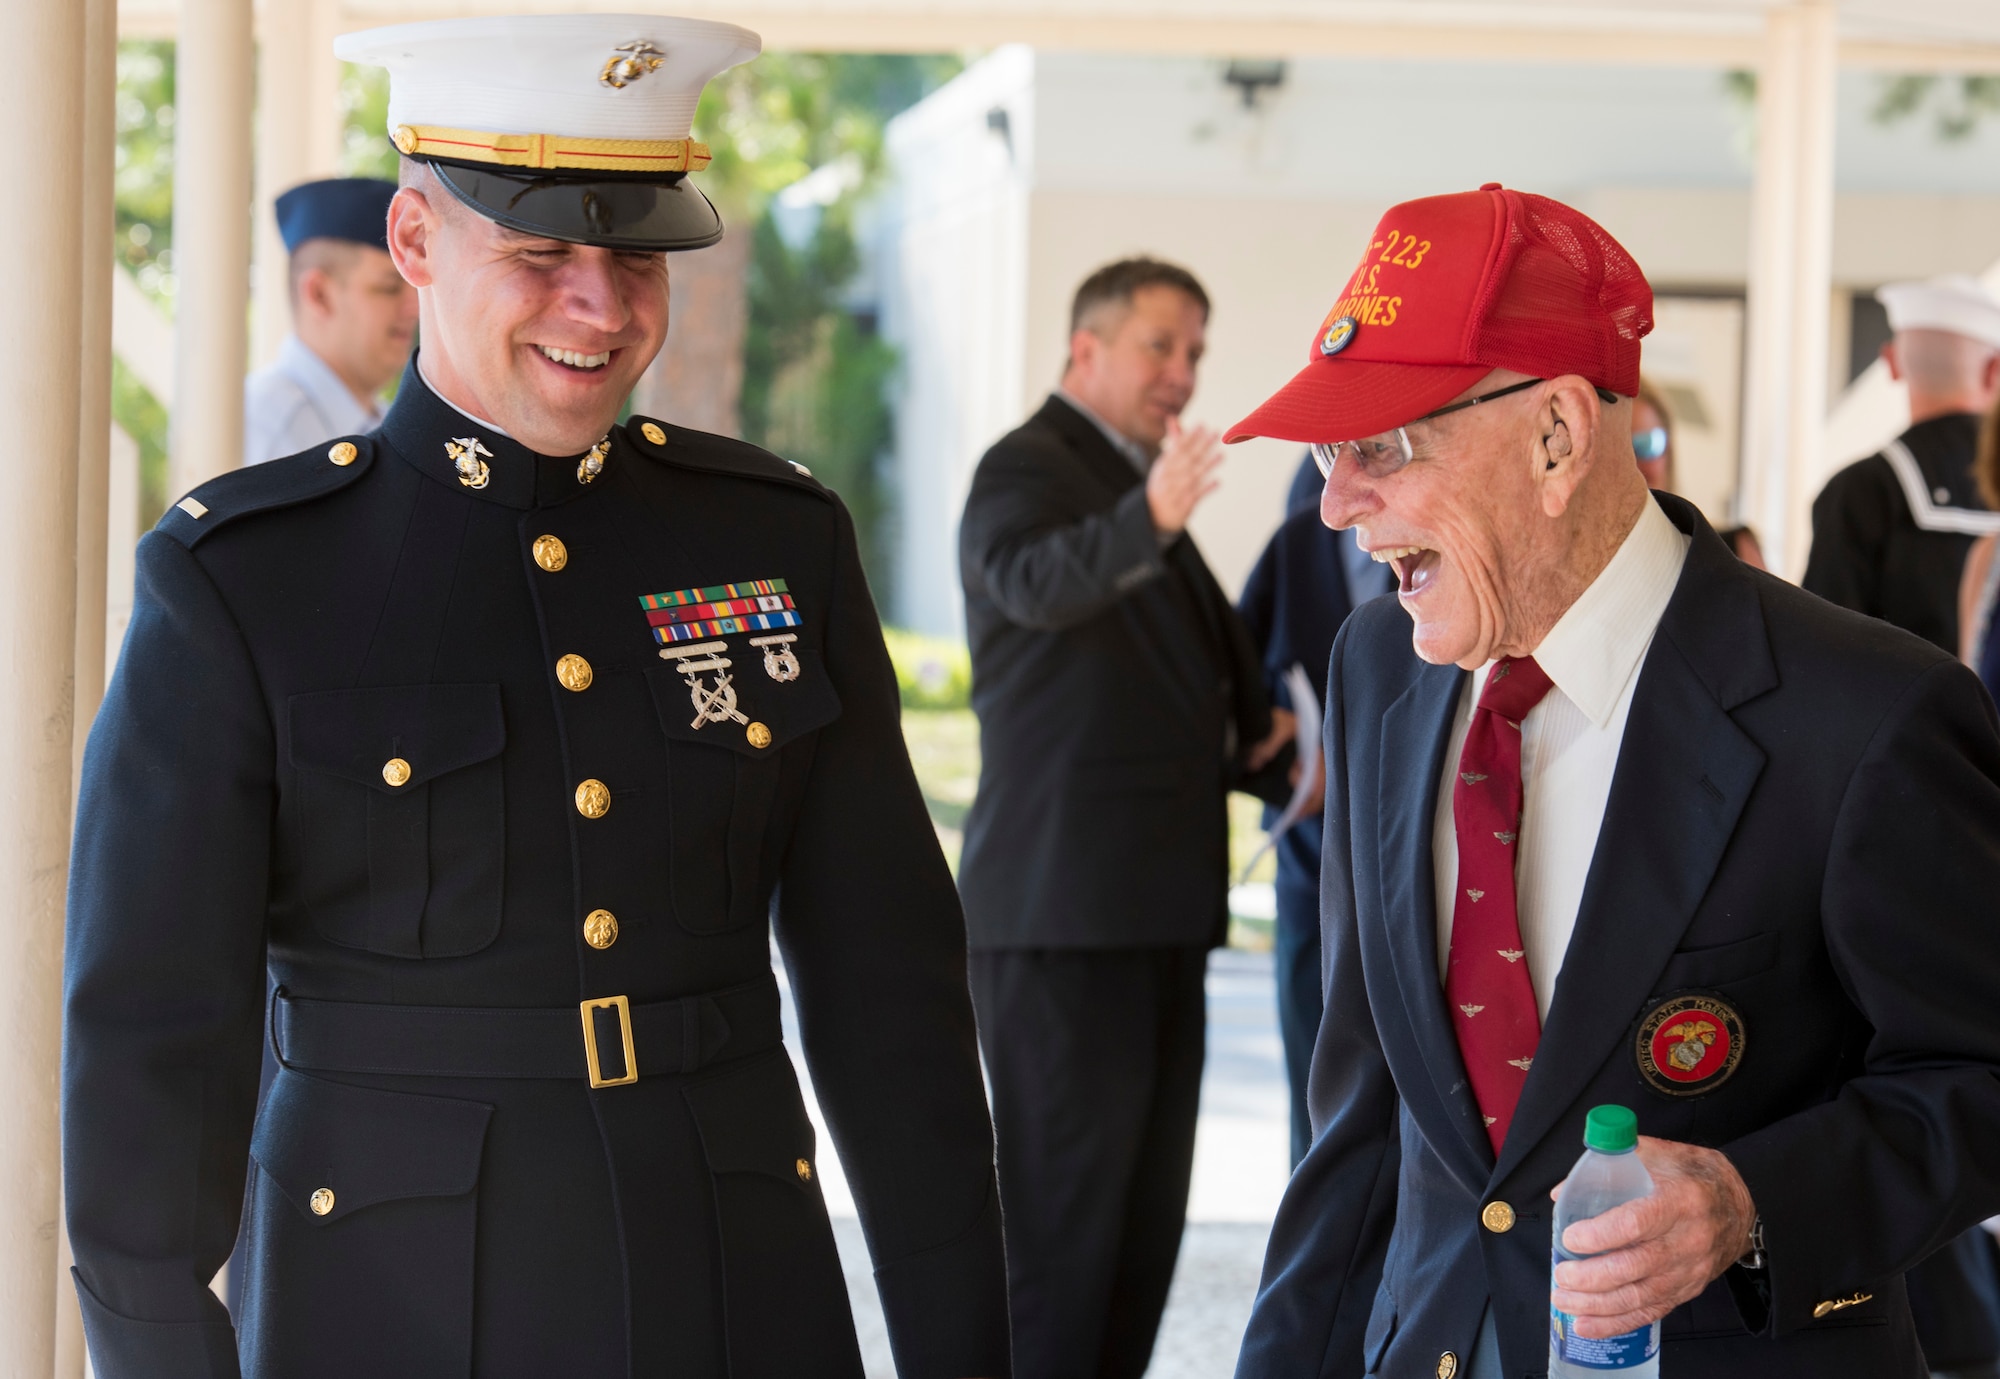 A U.S. Marine laughs with a World War II Marine Corps veteran before the 75th D-Day Commemoration at MacDill Air Force Base, Fla., June 6, 2019.